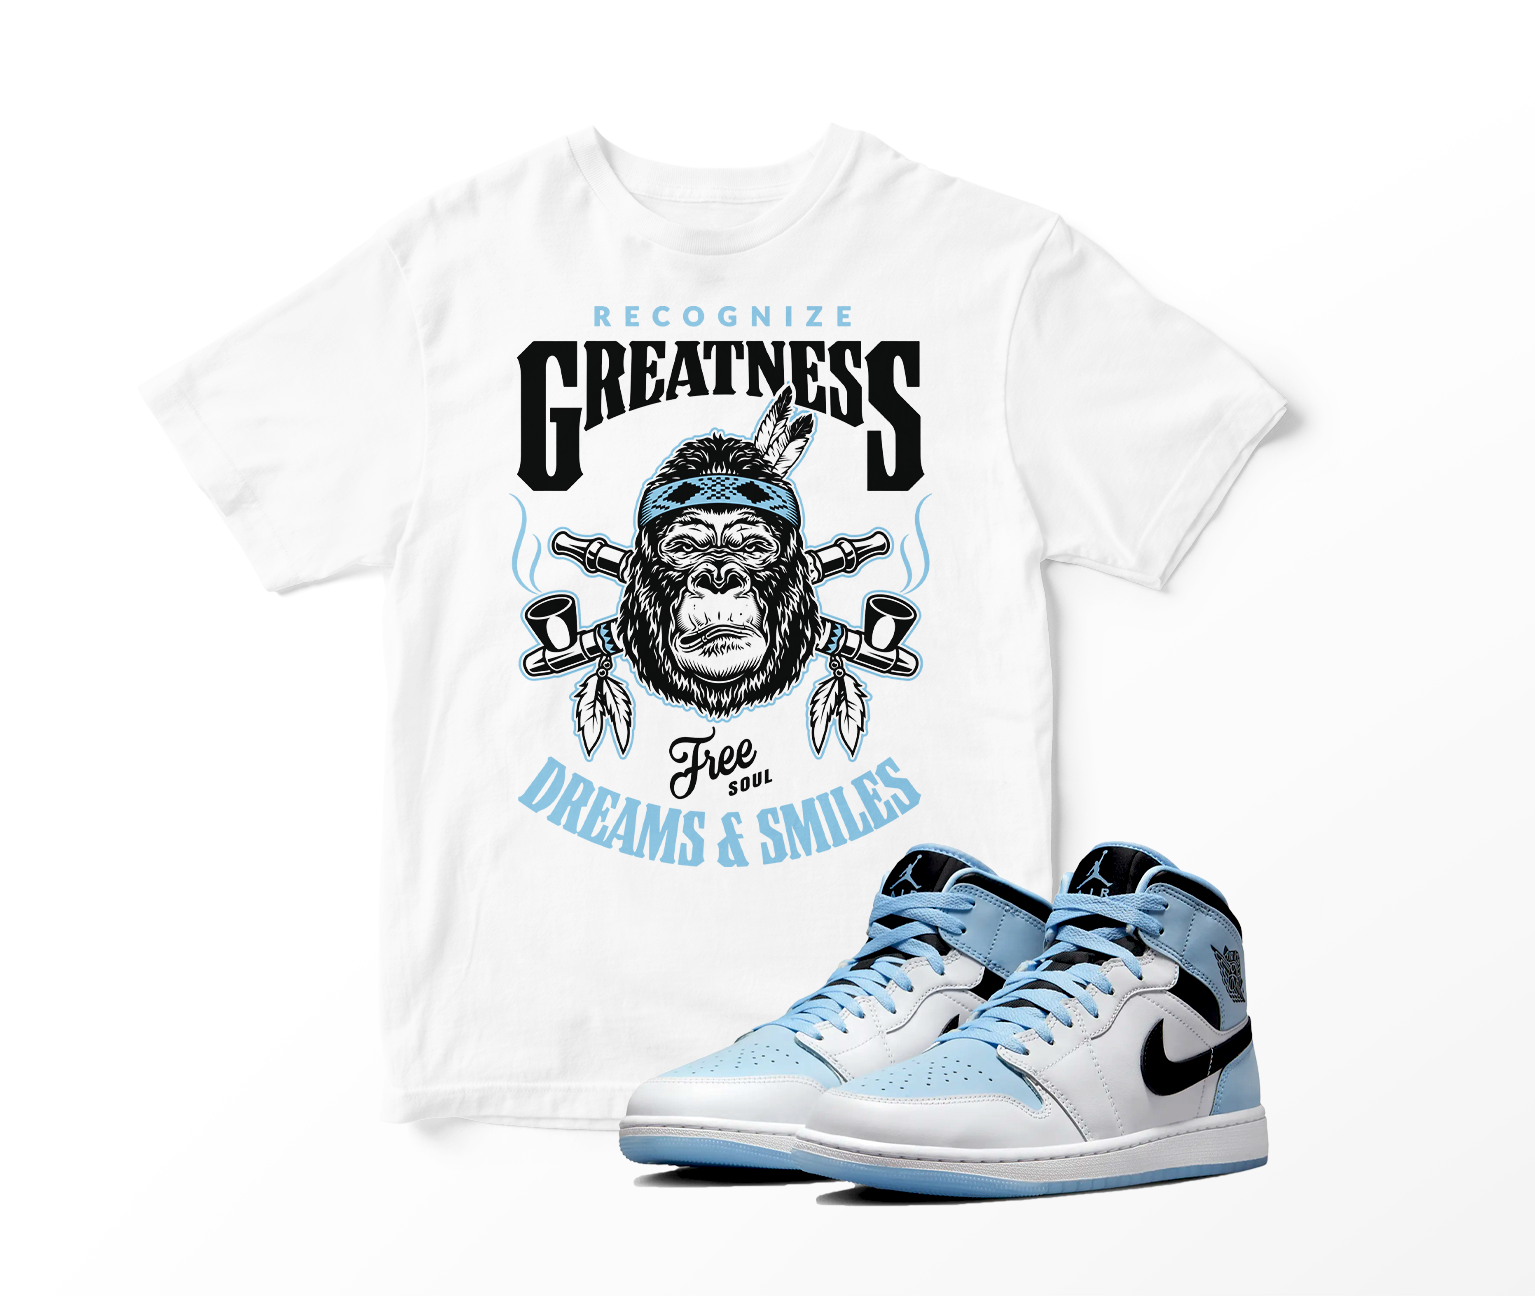 'Recognize Greatness' Custom Graphic Short Sleeve T-Shirt To Match Air Jordan 1 White Ice